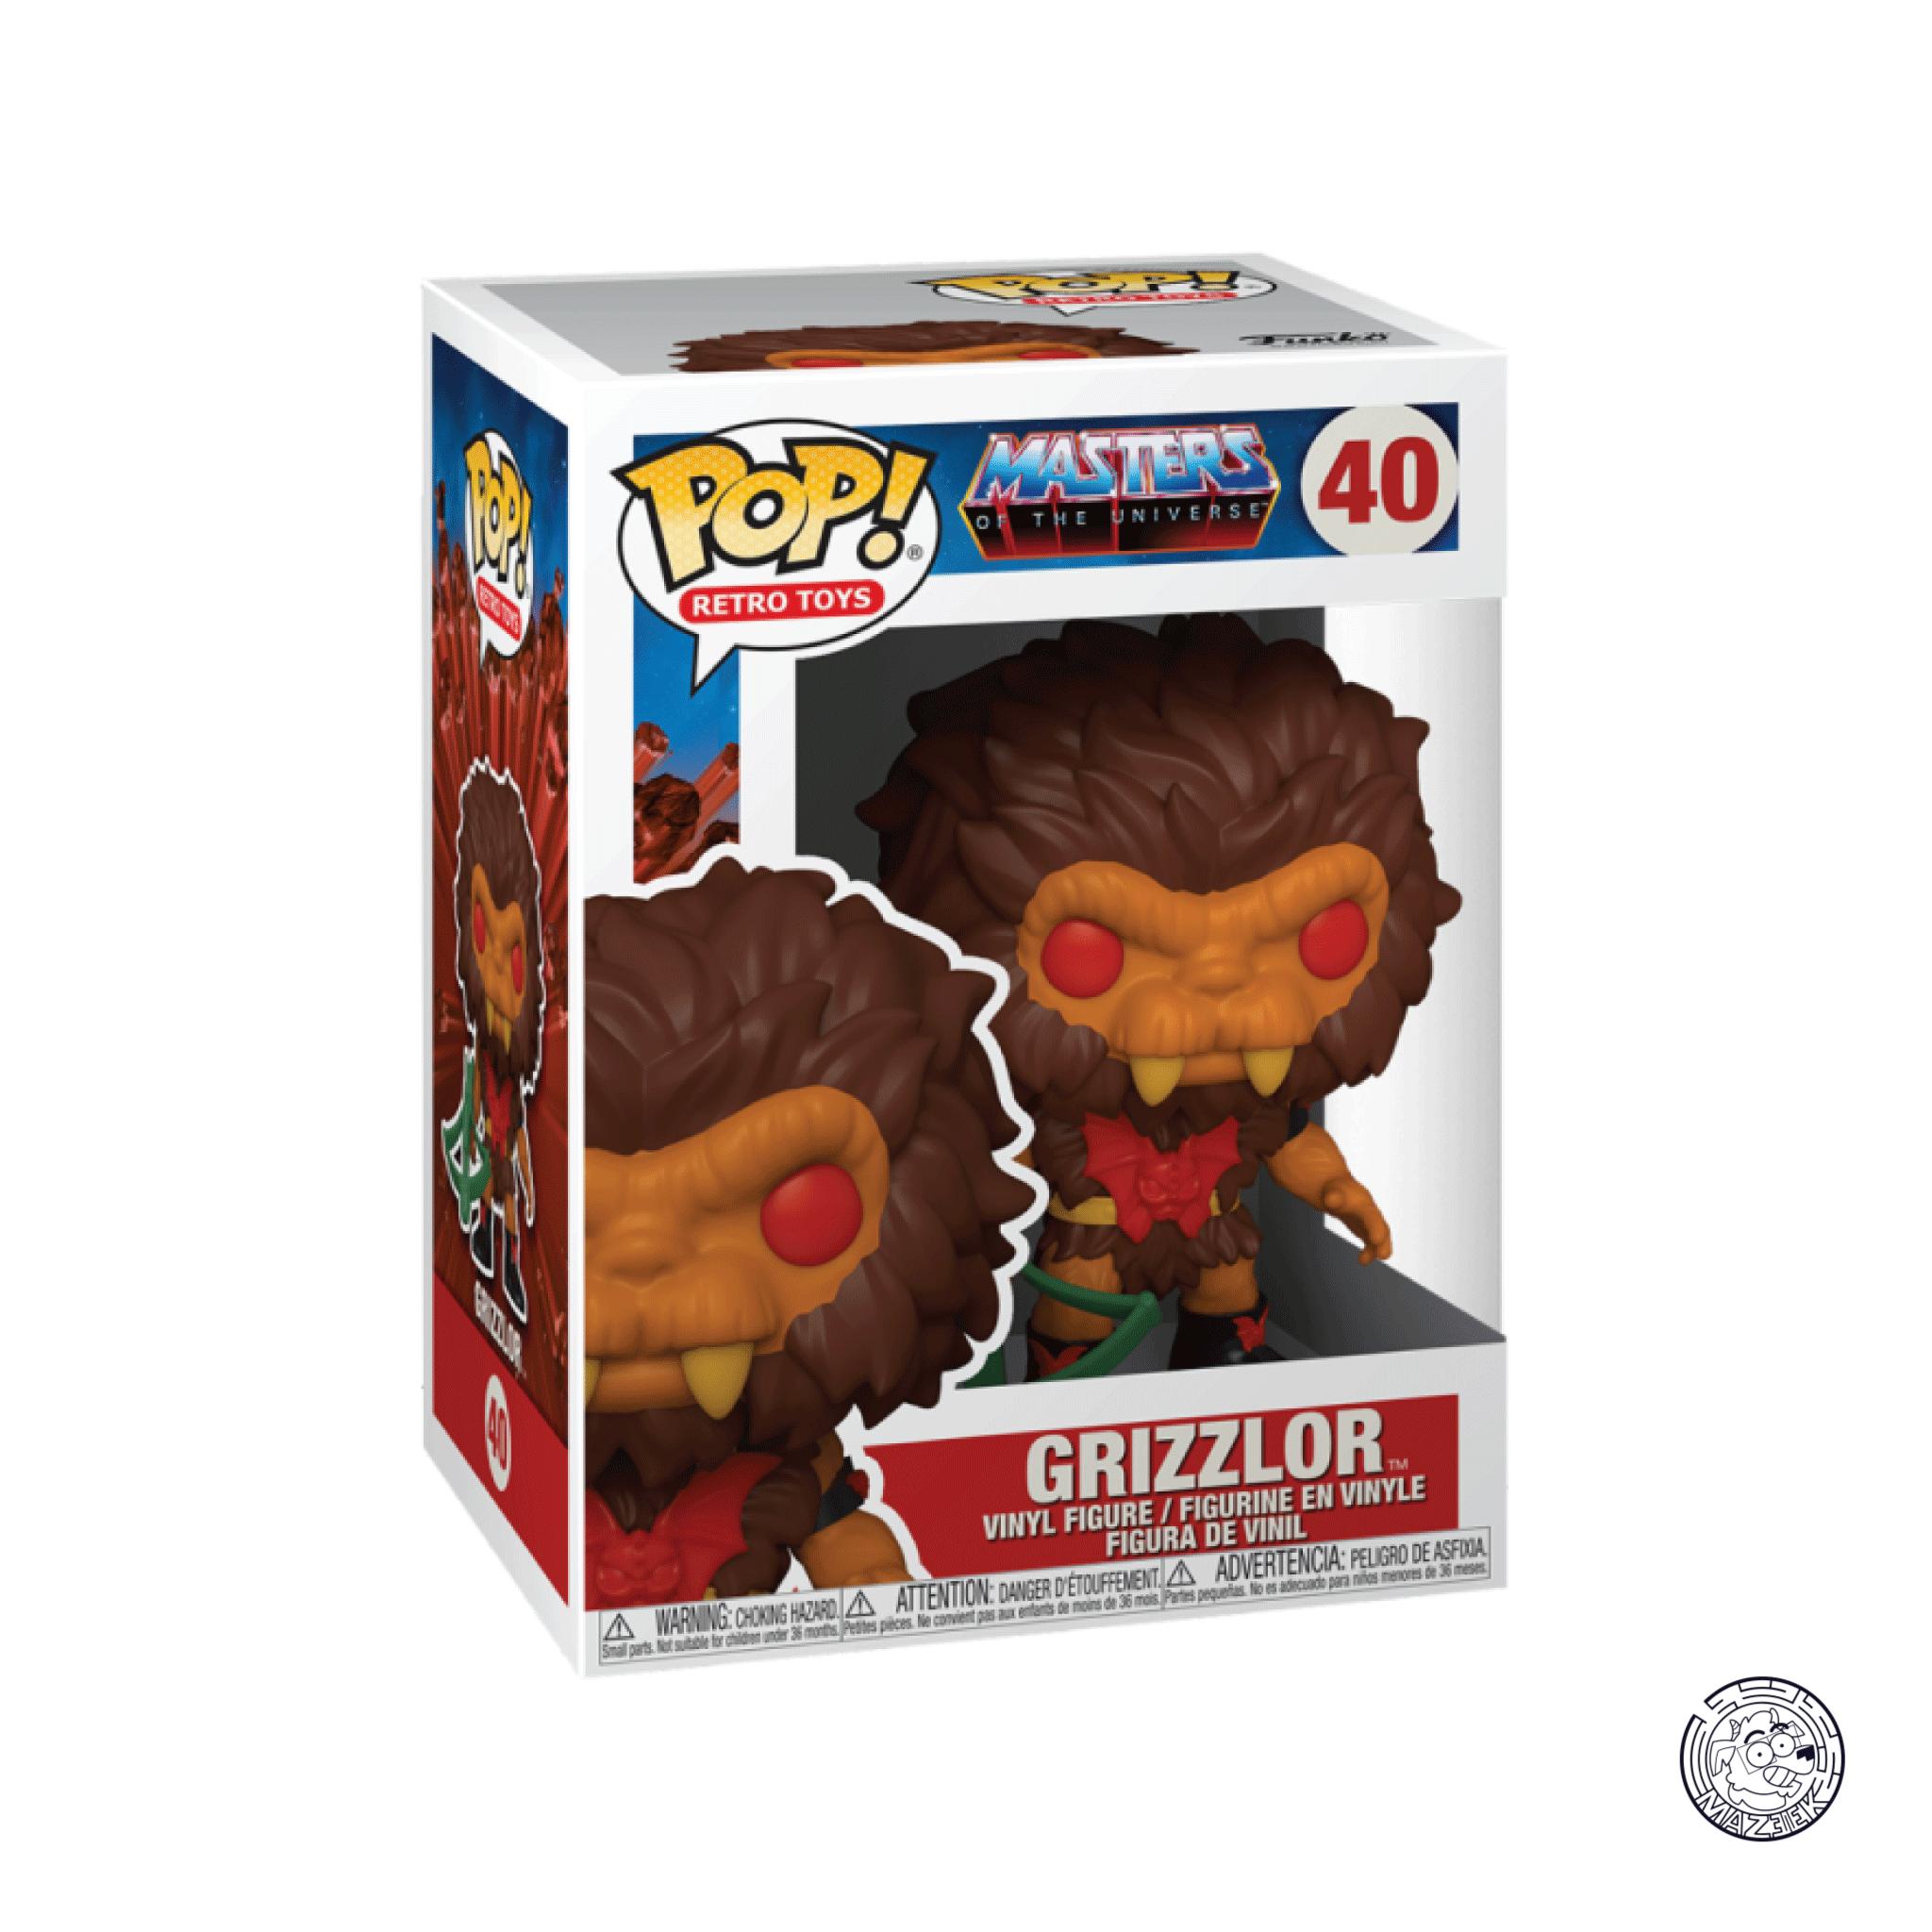 Funko POP! Masters of the Universe: Grizzlor 40